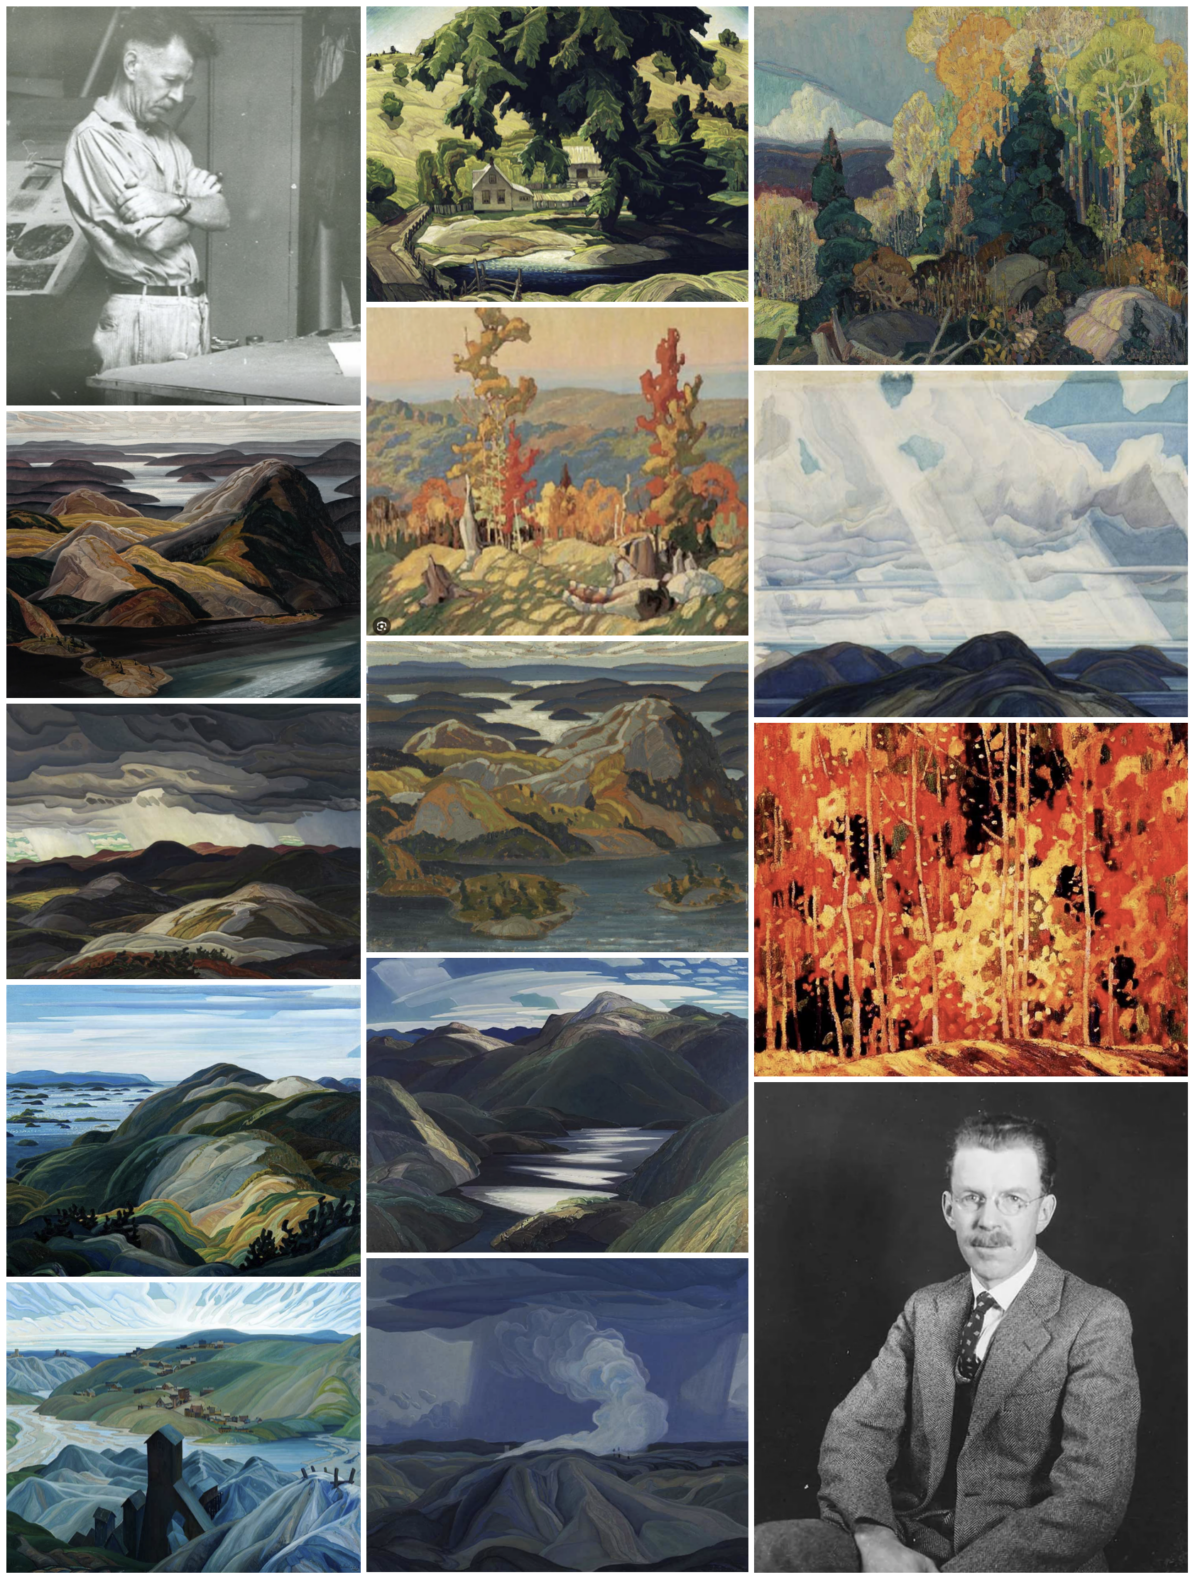 Franklin Carmichael - Canadian artist renowned for Canadian paintings and artwork